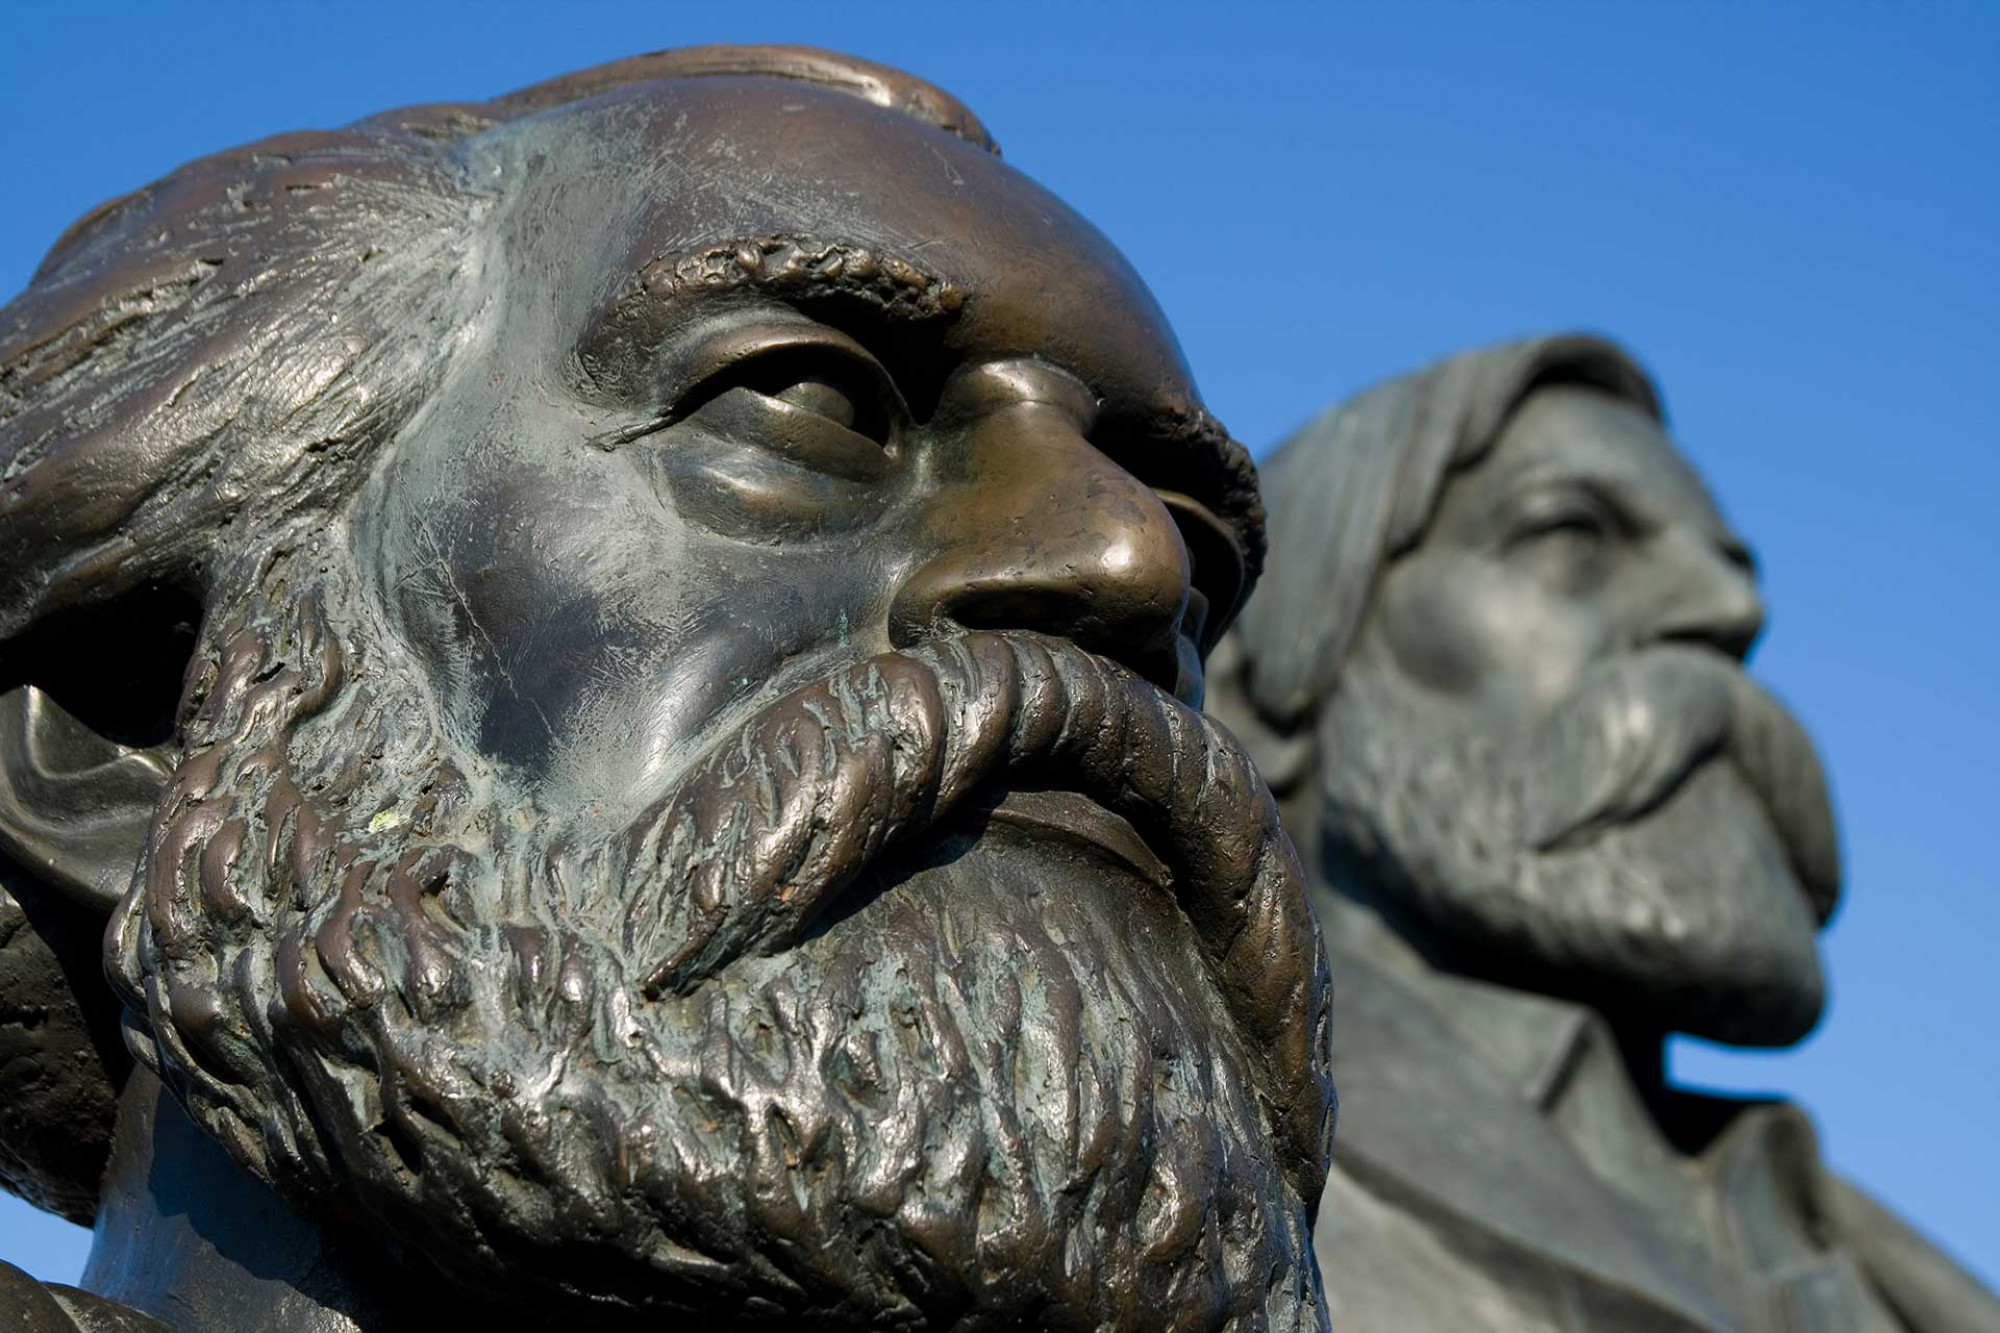 Statue of Karl Marx and Friedrich Engels